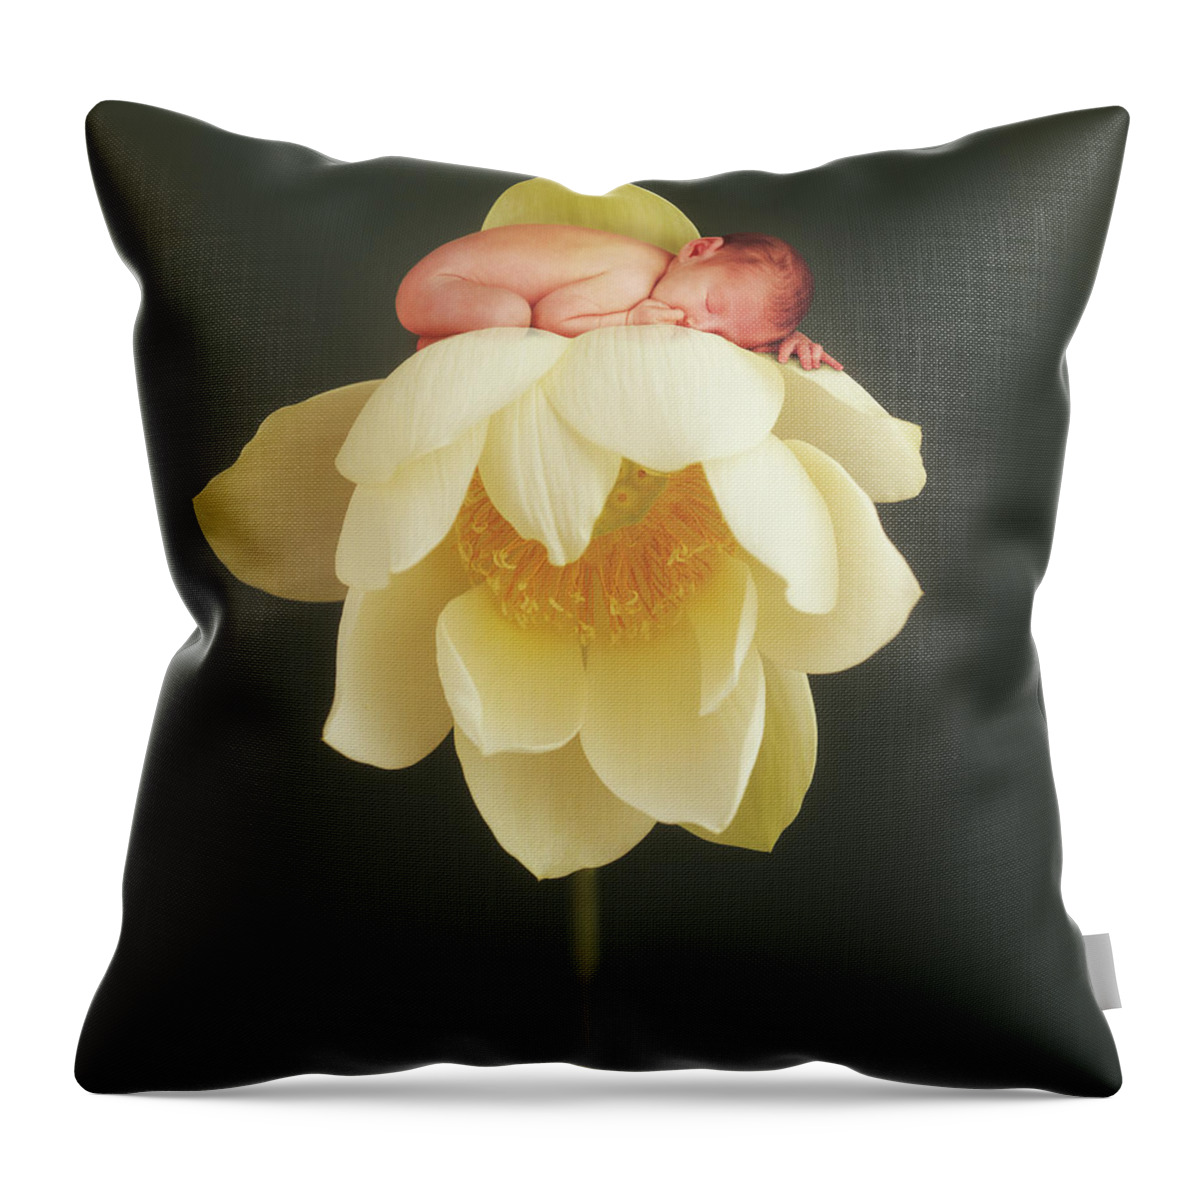 Water Lily Throw Pillow featuring the photograph Lotus Bud by Anne Geddes